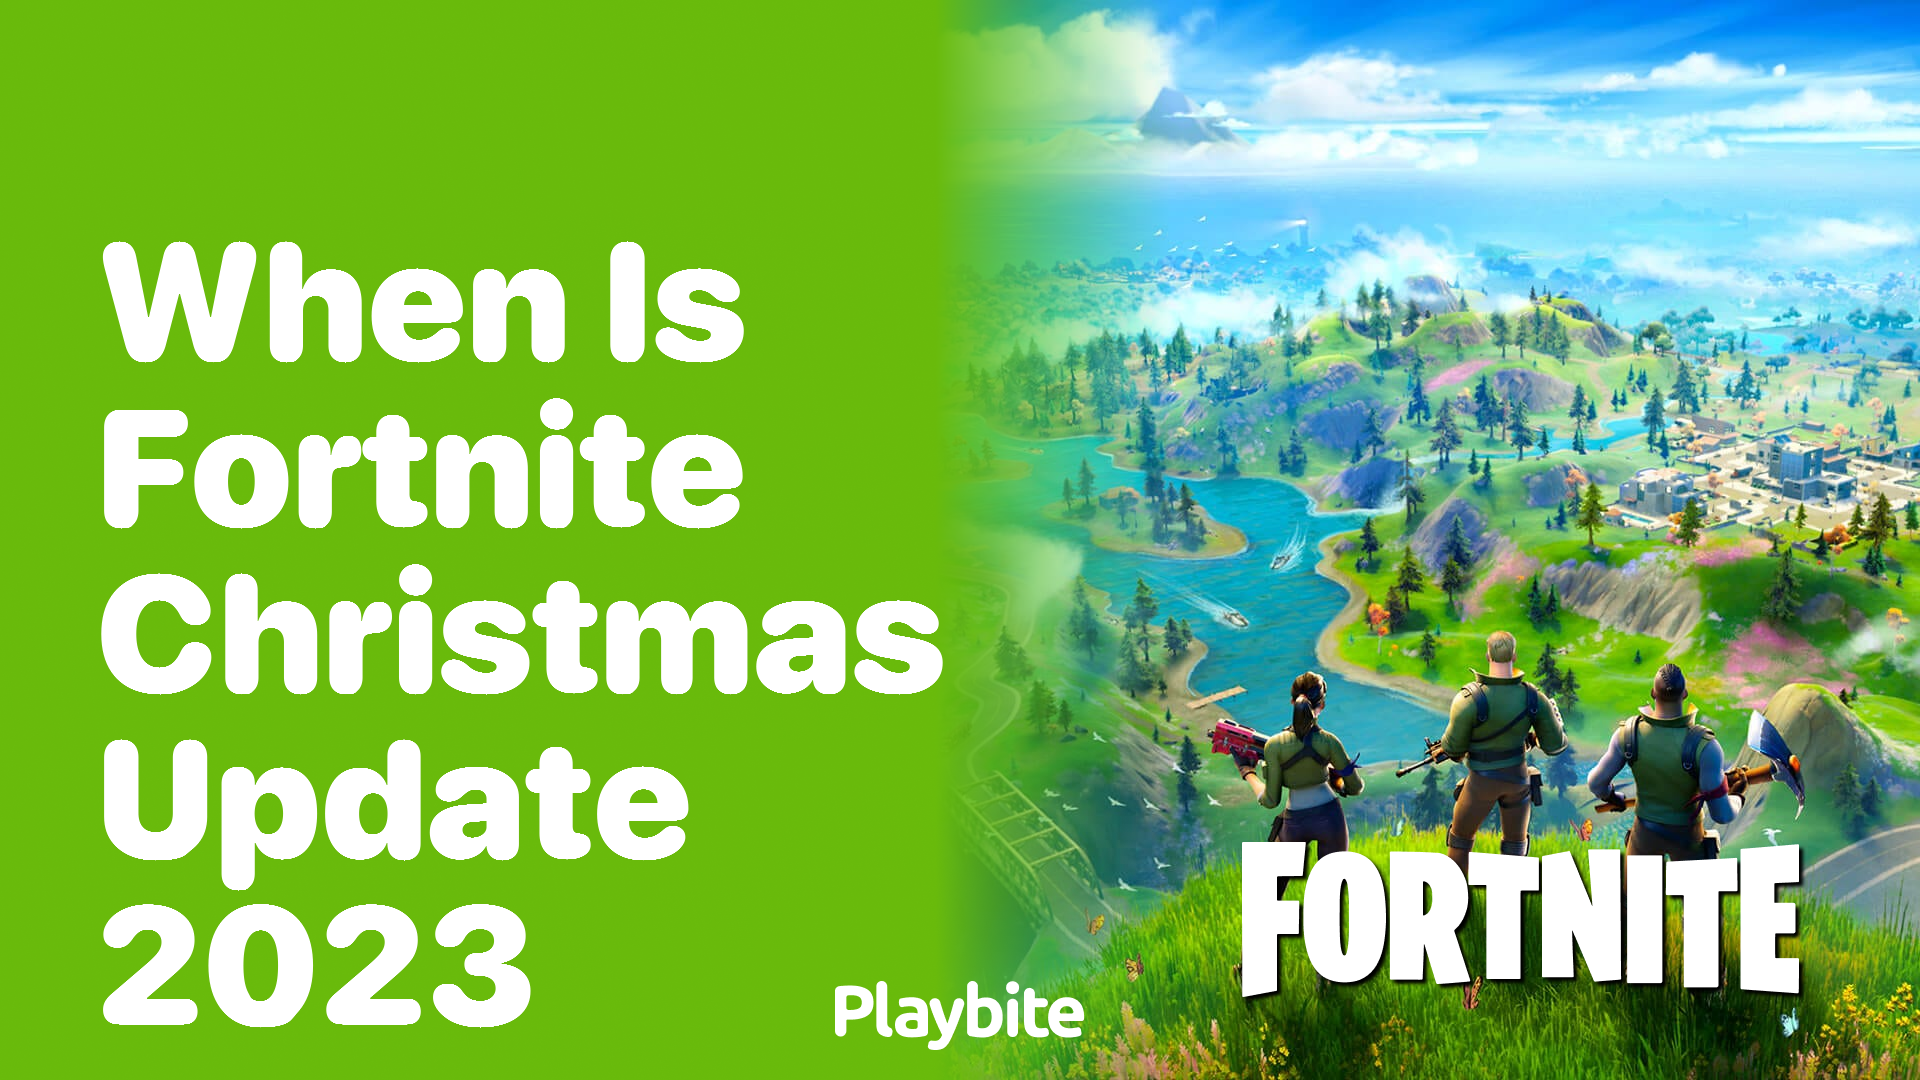 When is the Fortnite Christmas Update 2023 happening?